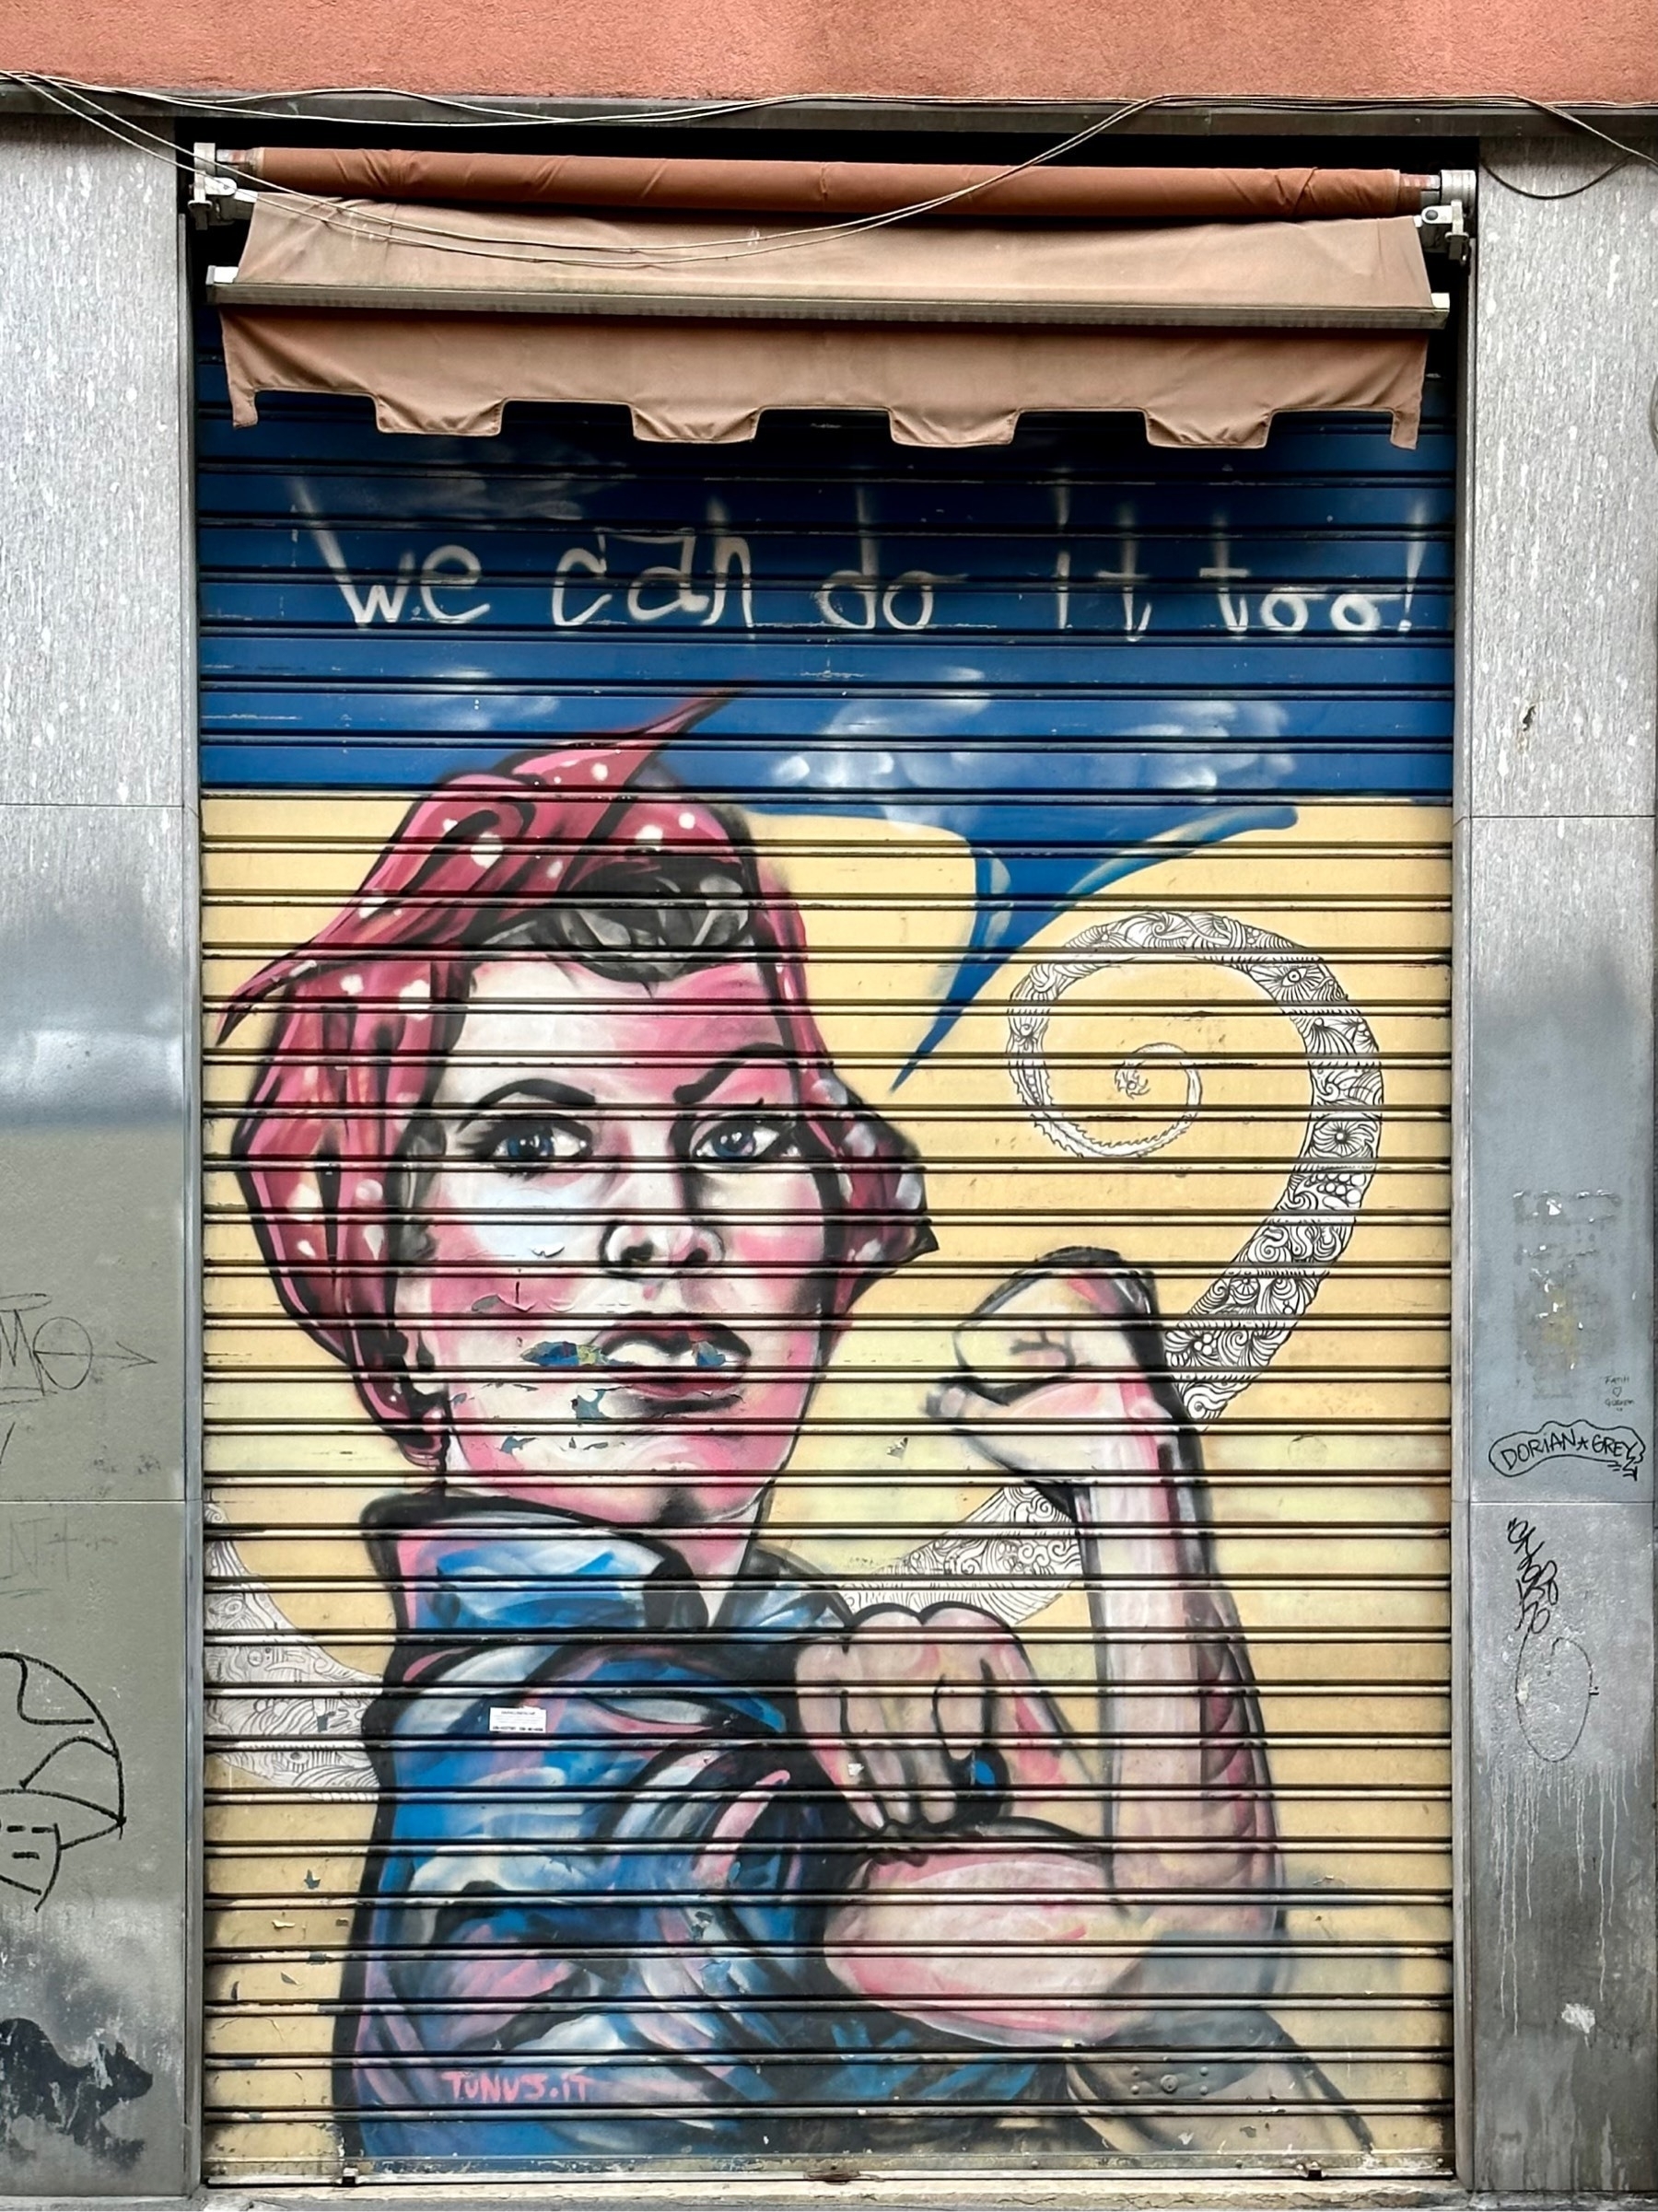 Mural of the text "We can do it too!" above a female caricature in a headscarf flexing her bicep